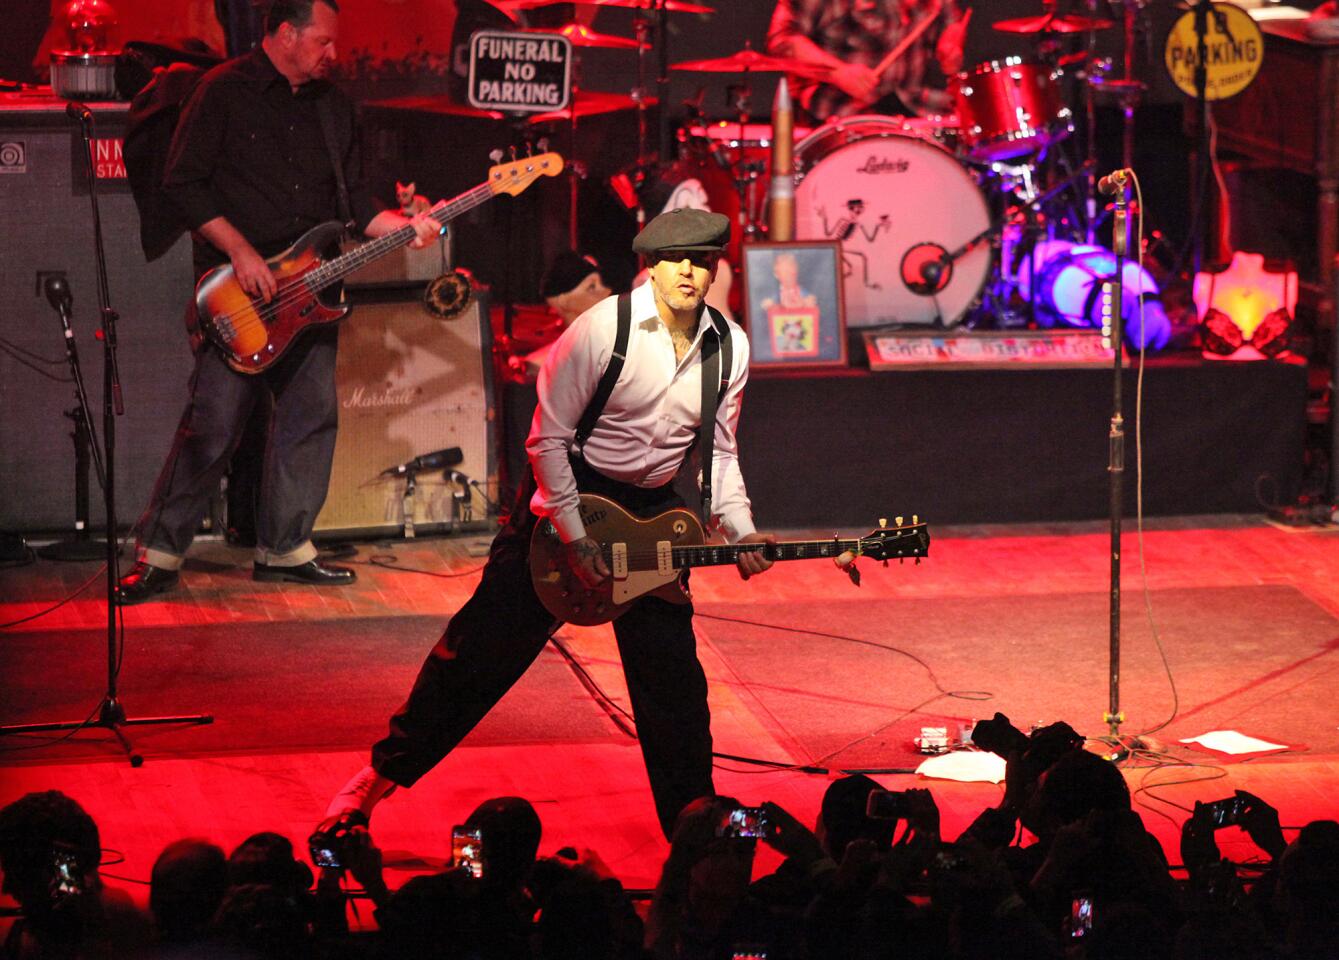 Front man Mike Ness of the punk band Social Distortion opens the show with "Bad Luck" and "So Far Away" during the grand opening of the new House of Blues at Anaheim's GardenWalk on Tuesday.